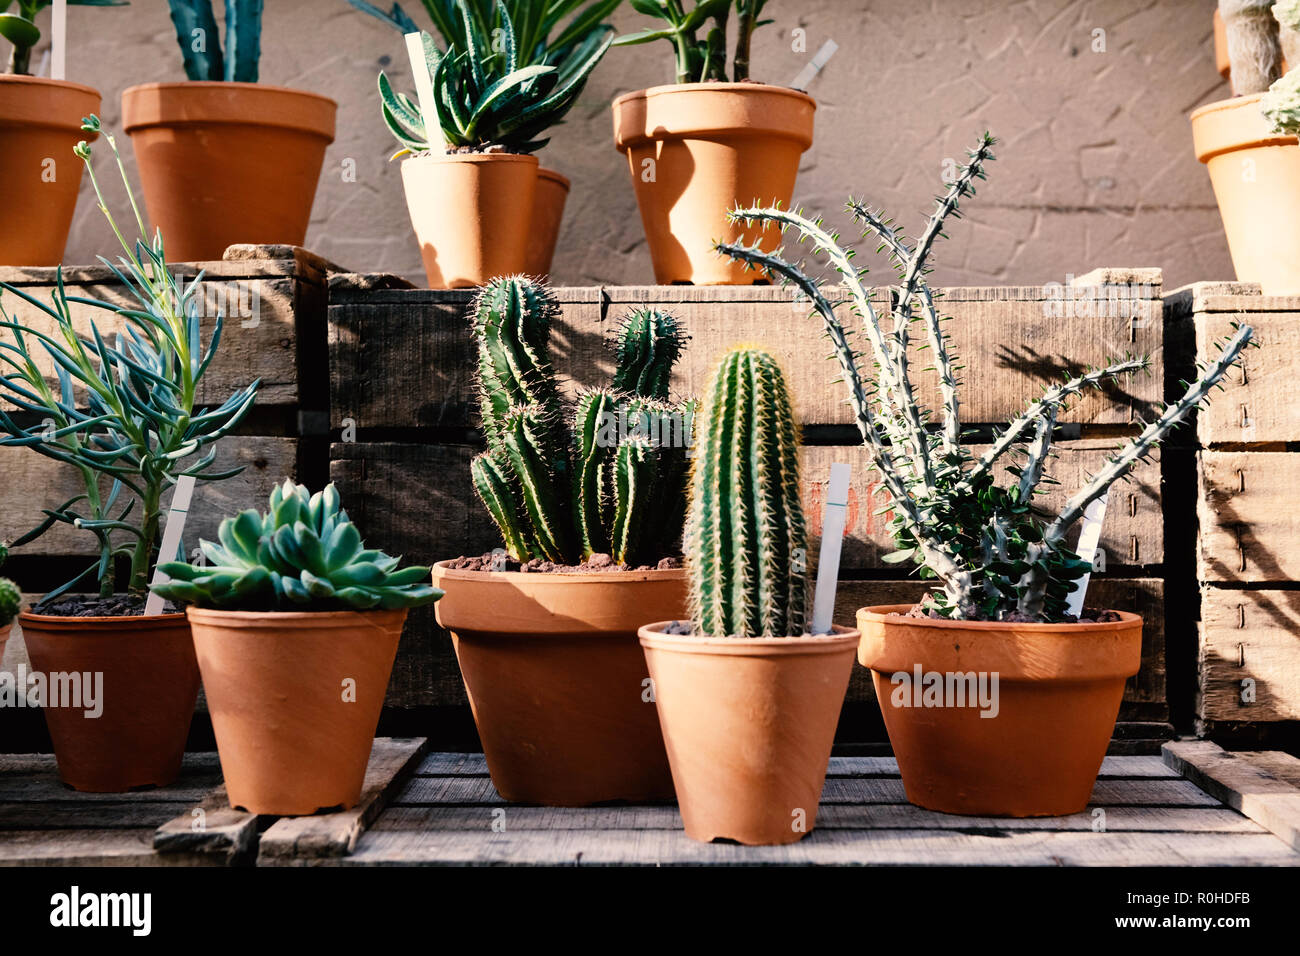 A collection of cactus exposed in clay pots. Stock Photo